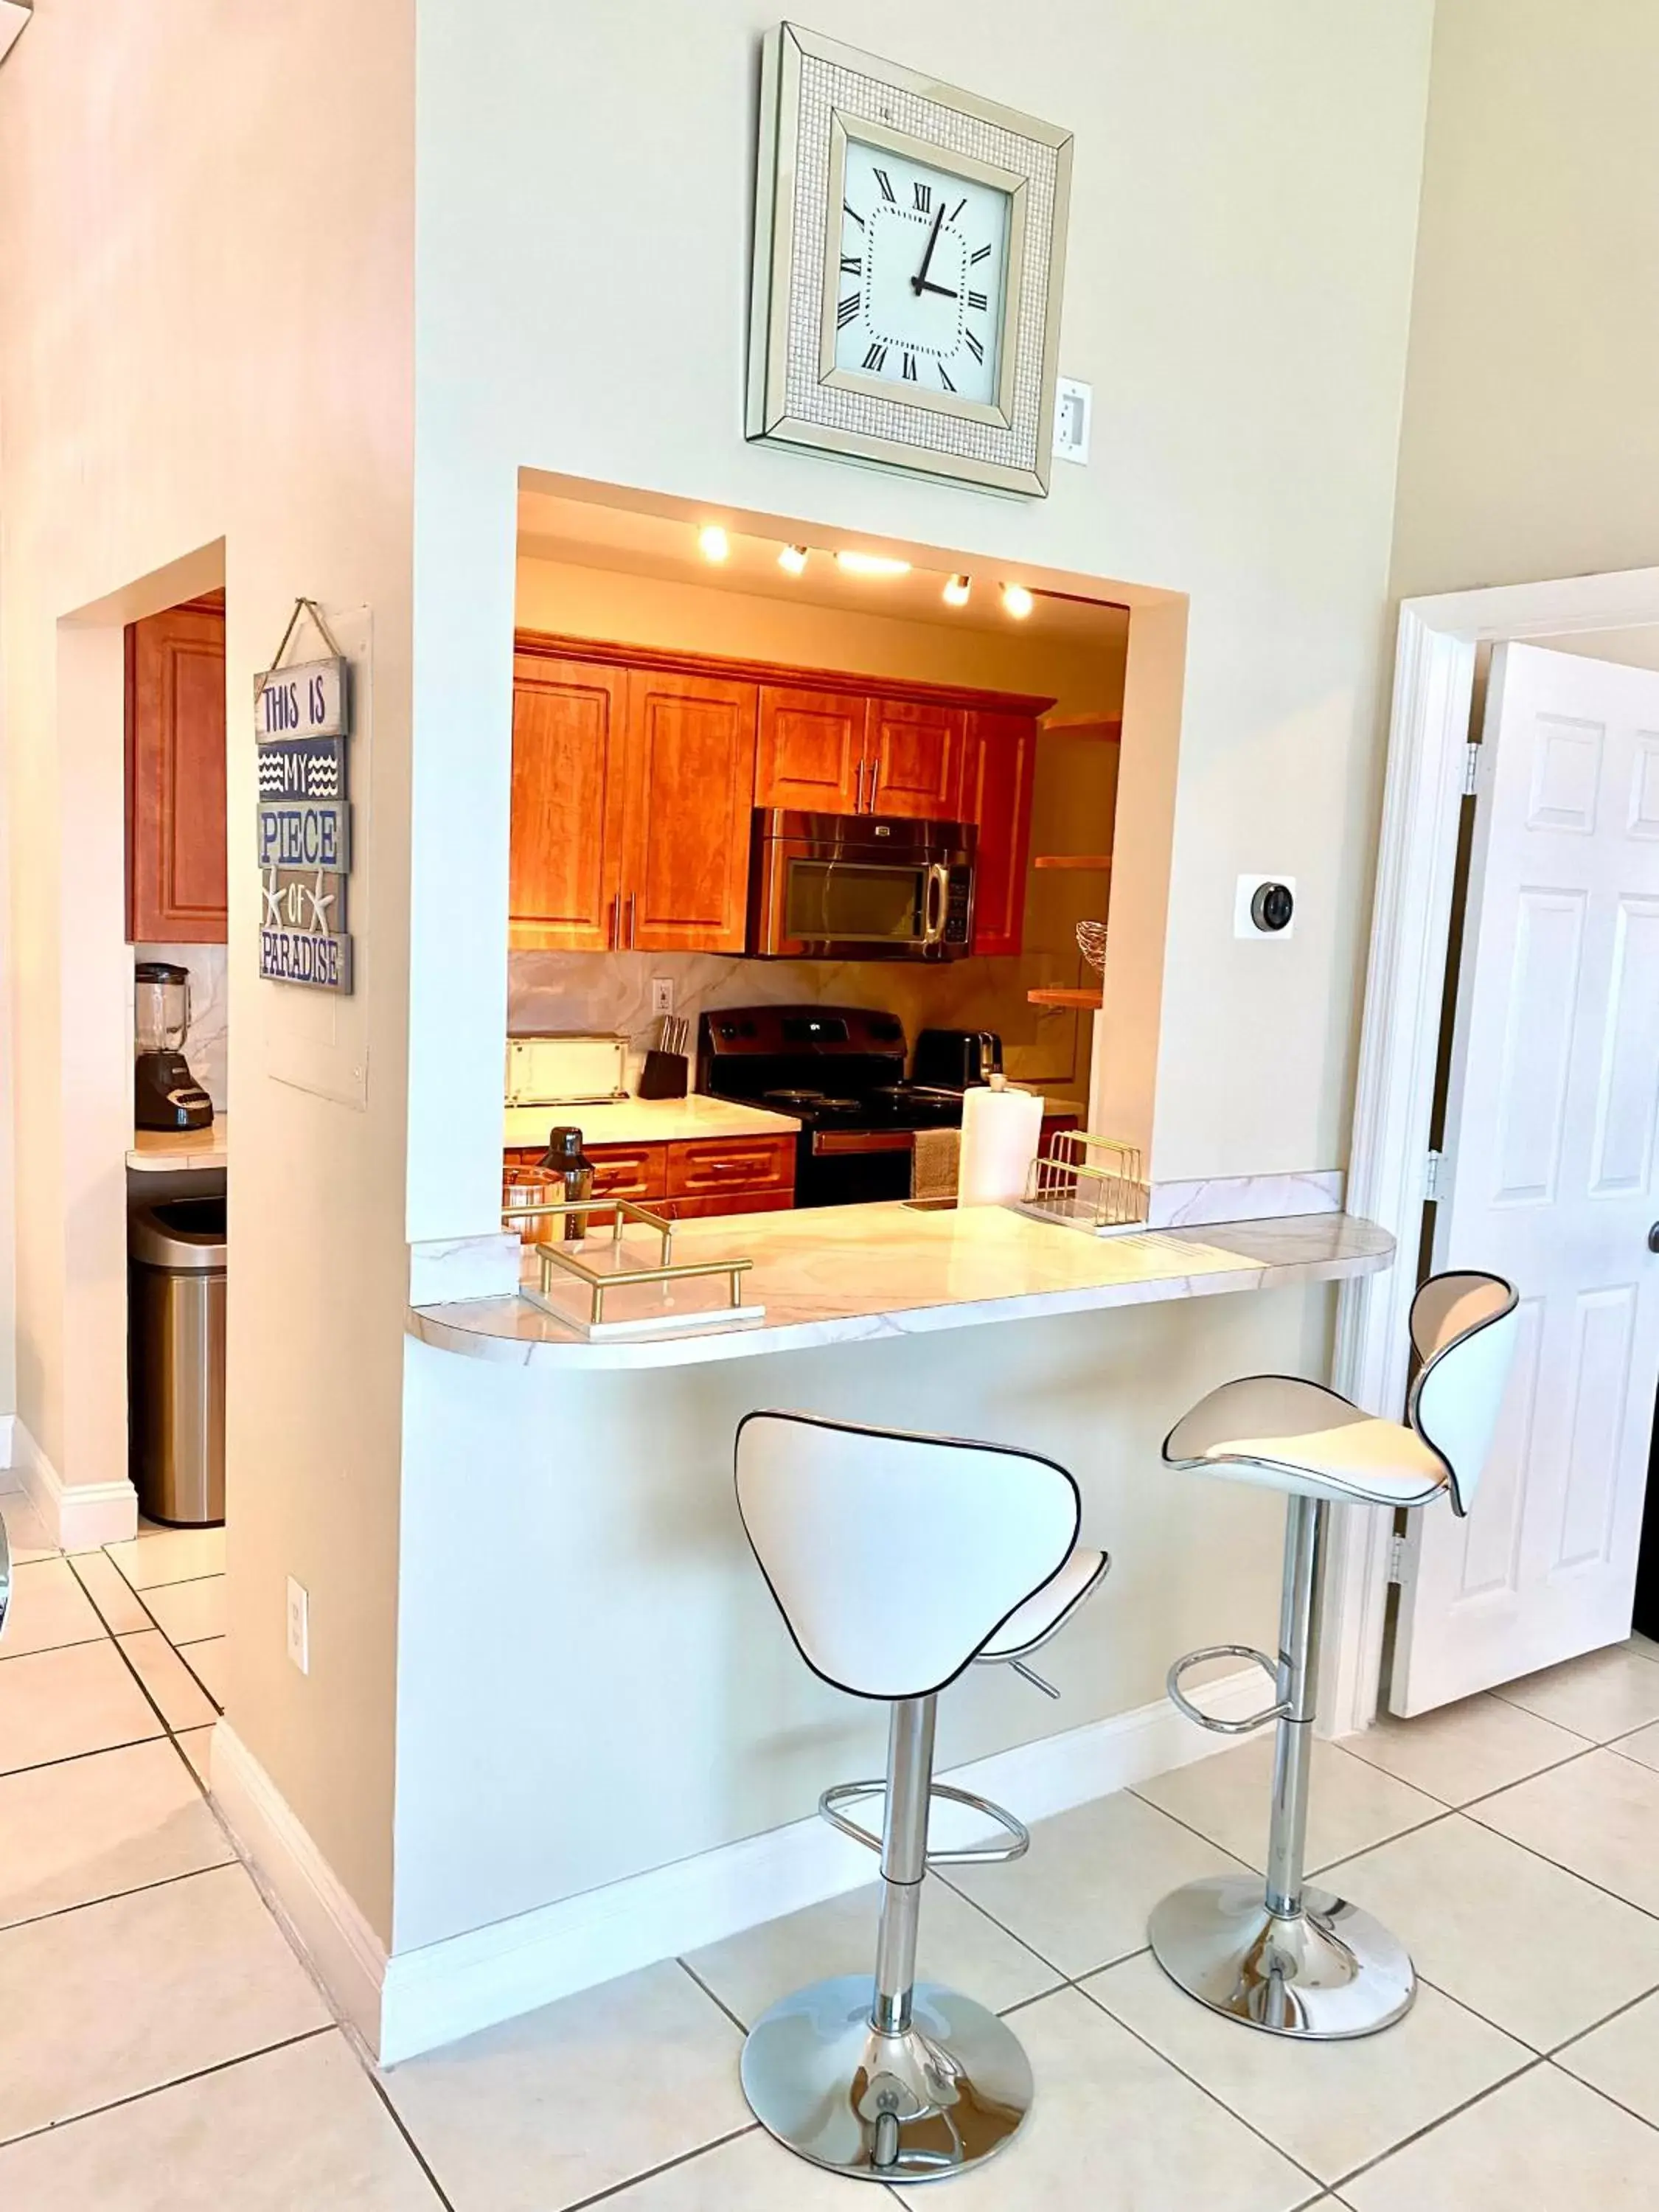 Kitchen/Kitchenette in Castle Beach Resort Condo Penthouse or 1BR Direct Ocean View -just remodeled-